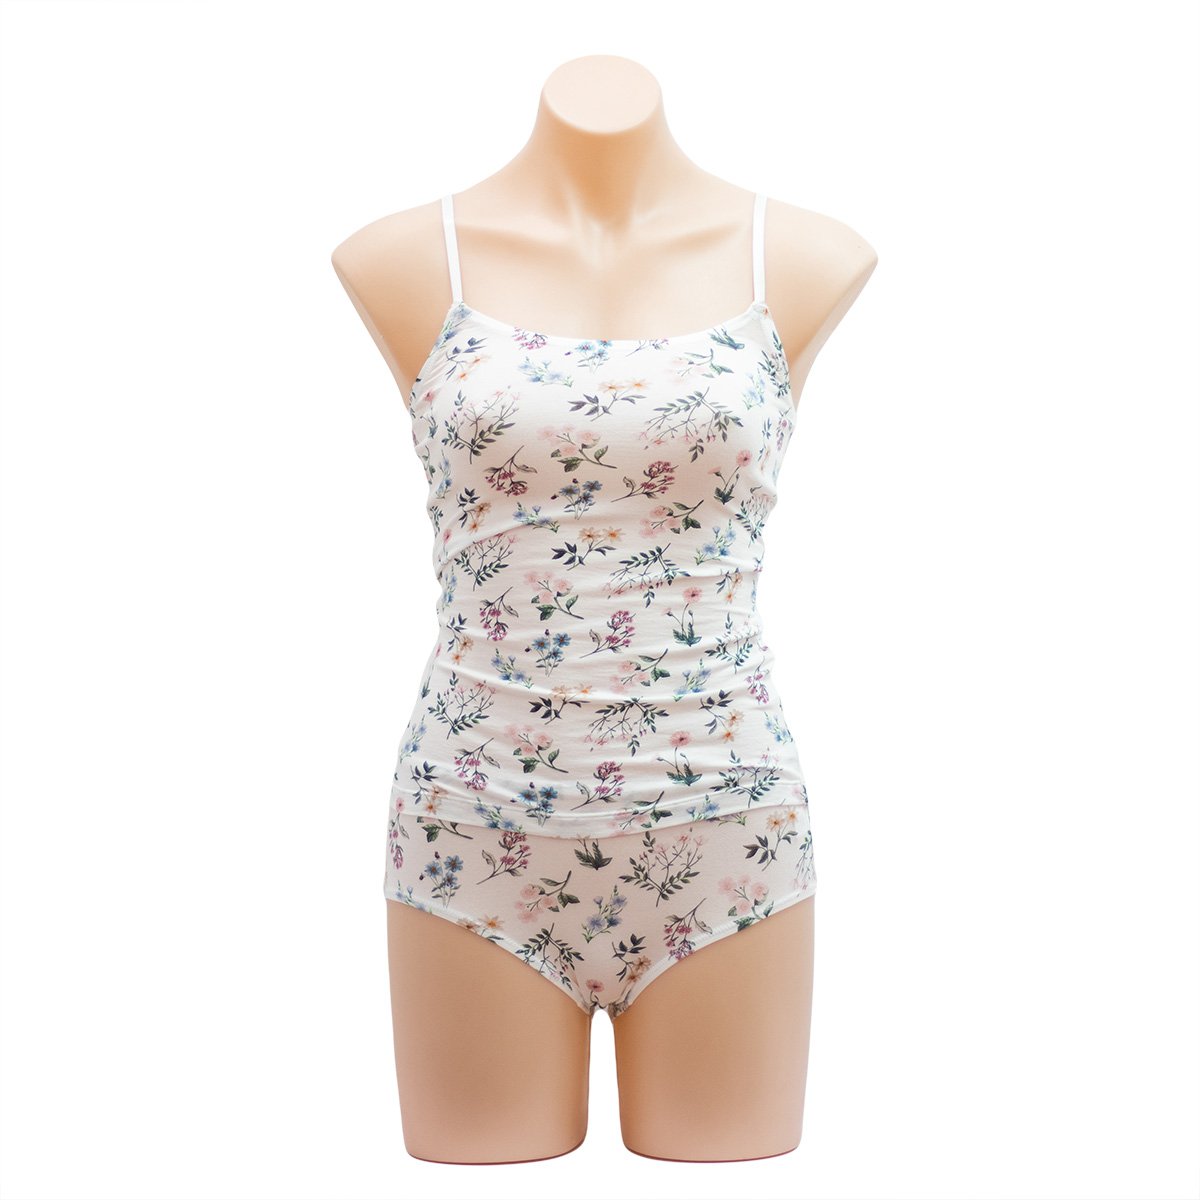 Love & Lustre Anneliese Camisole LL857 - Singlets & Tanks Liberty Print / 8 / XS  Available at Illusions Lingerie